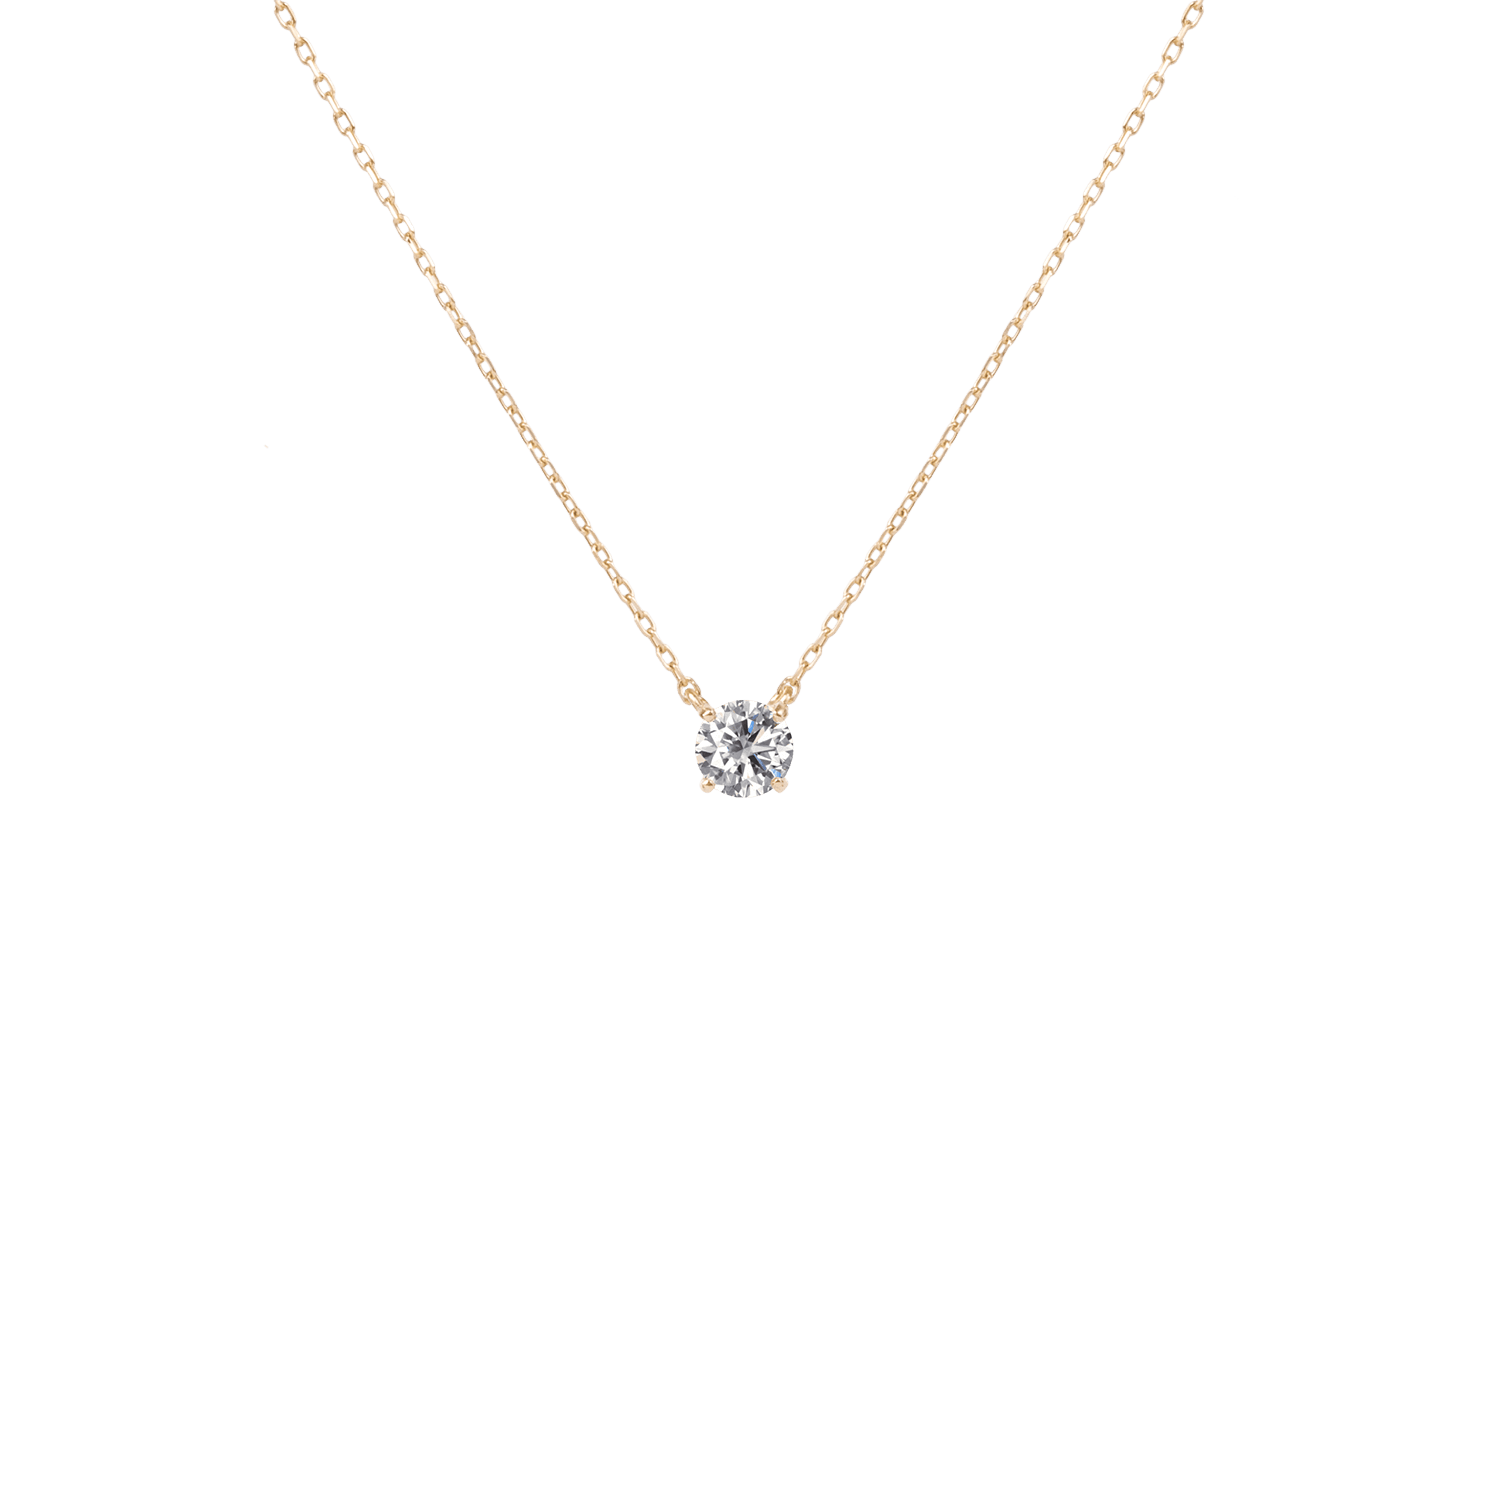 Solitaire Lab-Grown Diamond Necklace | 18K yellow gold / Chain length 420 mm / 0.3 ct  | Jewelry | The Future Rocks